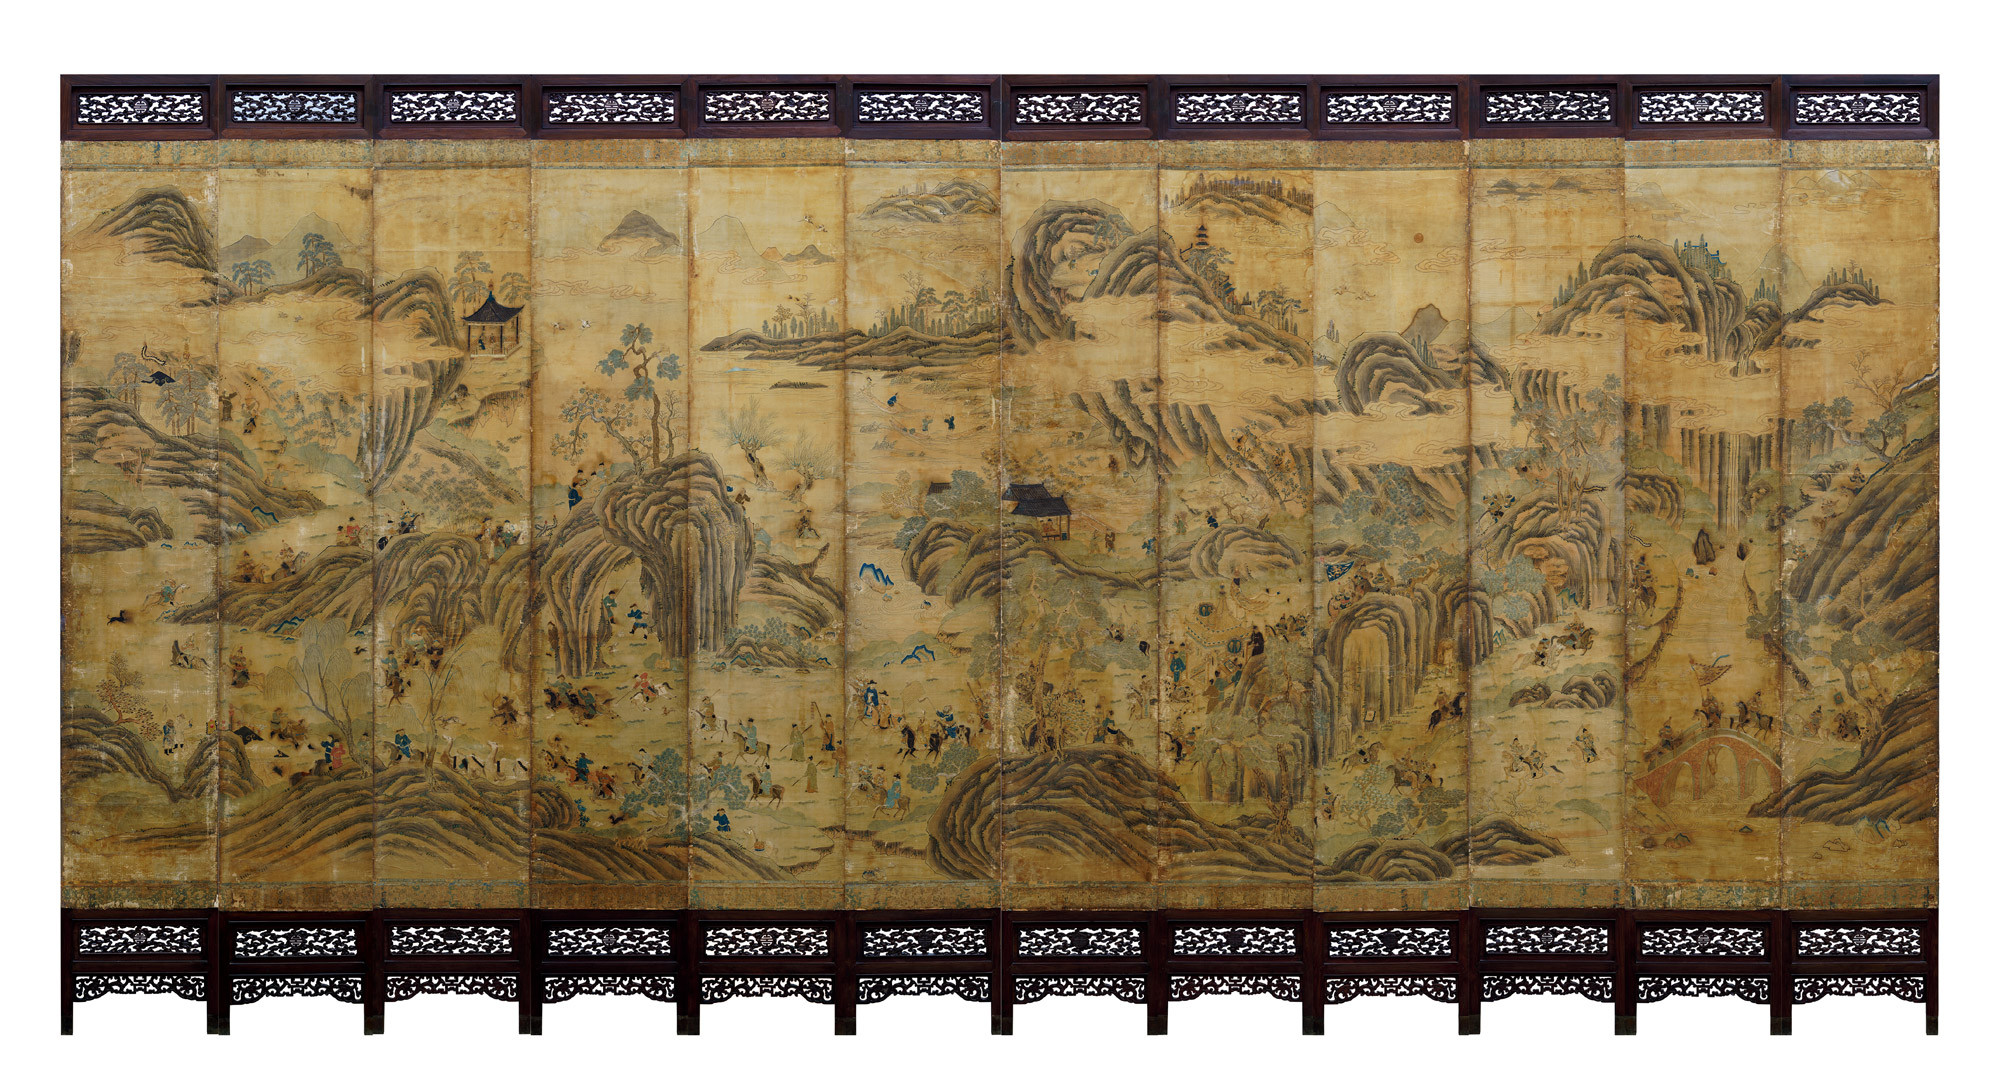 AN EXTREMELY RARE AND IMPORTANT IMPERIAL SET OF TWELVE-PANEL SCREENS WITH ZITAN FRAME